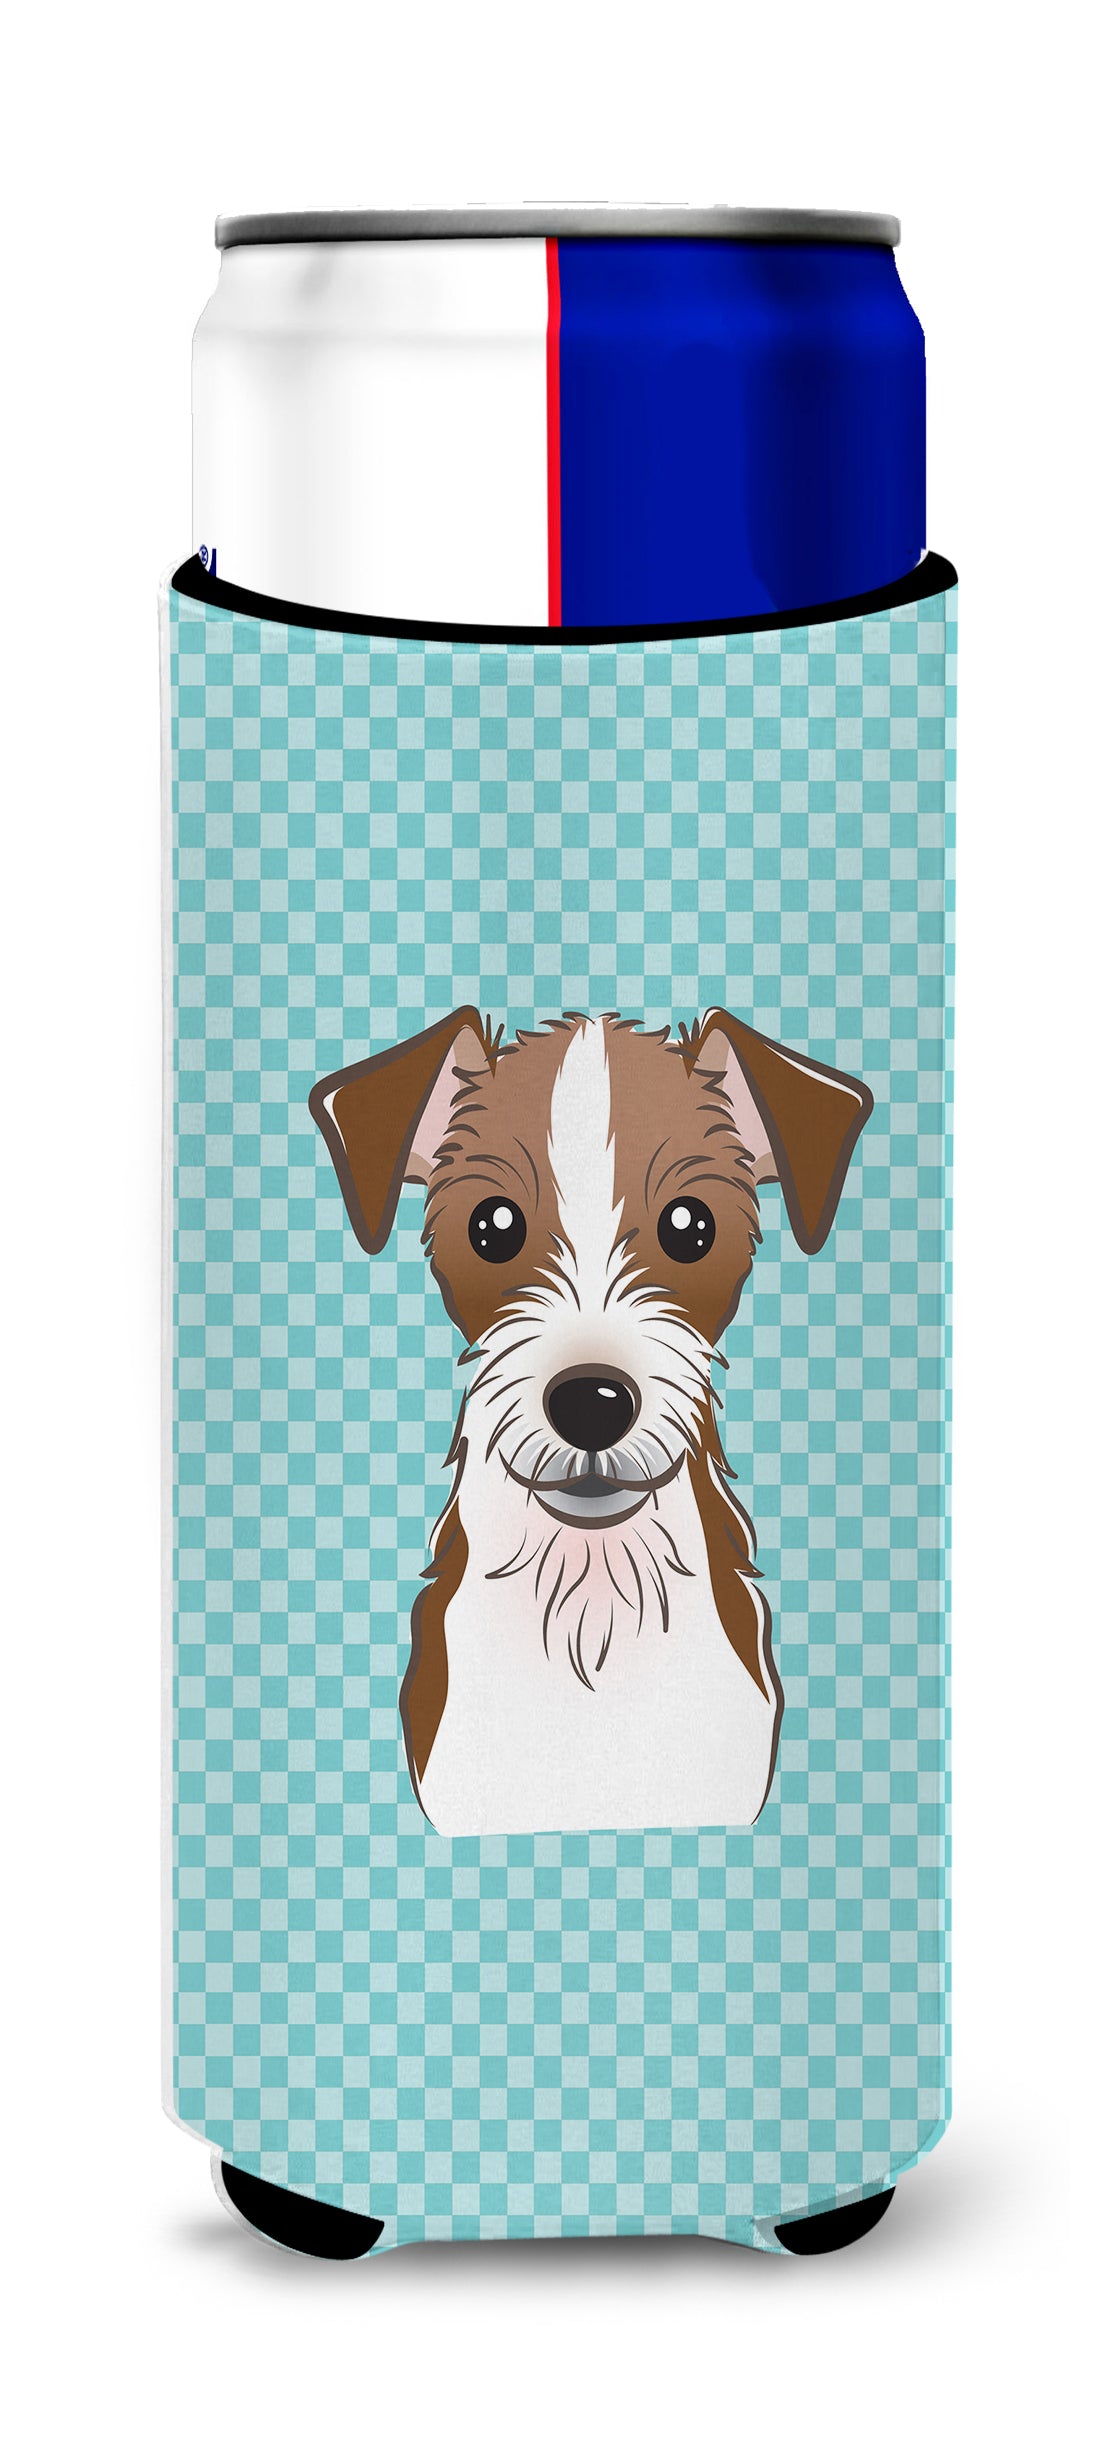 Checkerboard Blue Jack Russell Terrier Ultra Beverage Insulators for slim cans